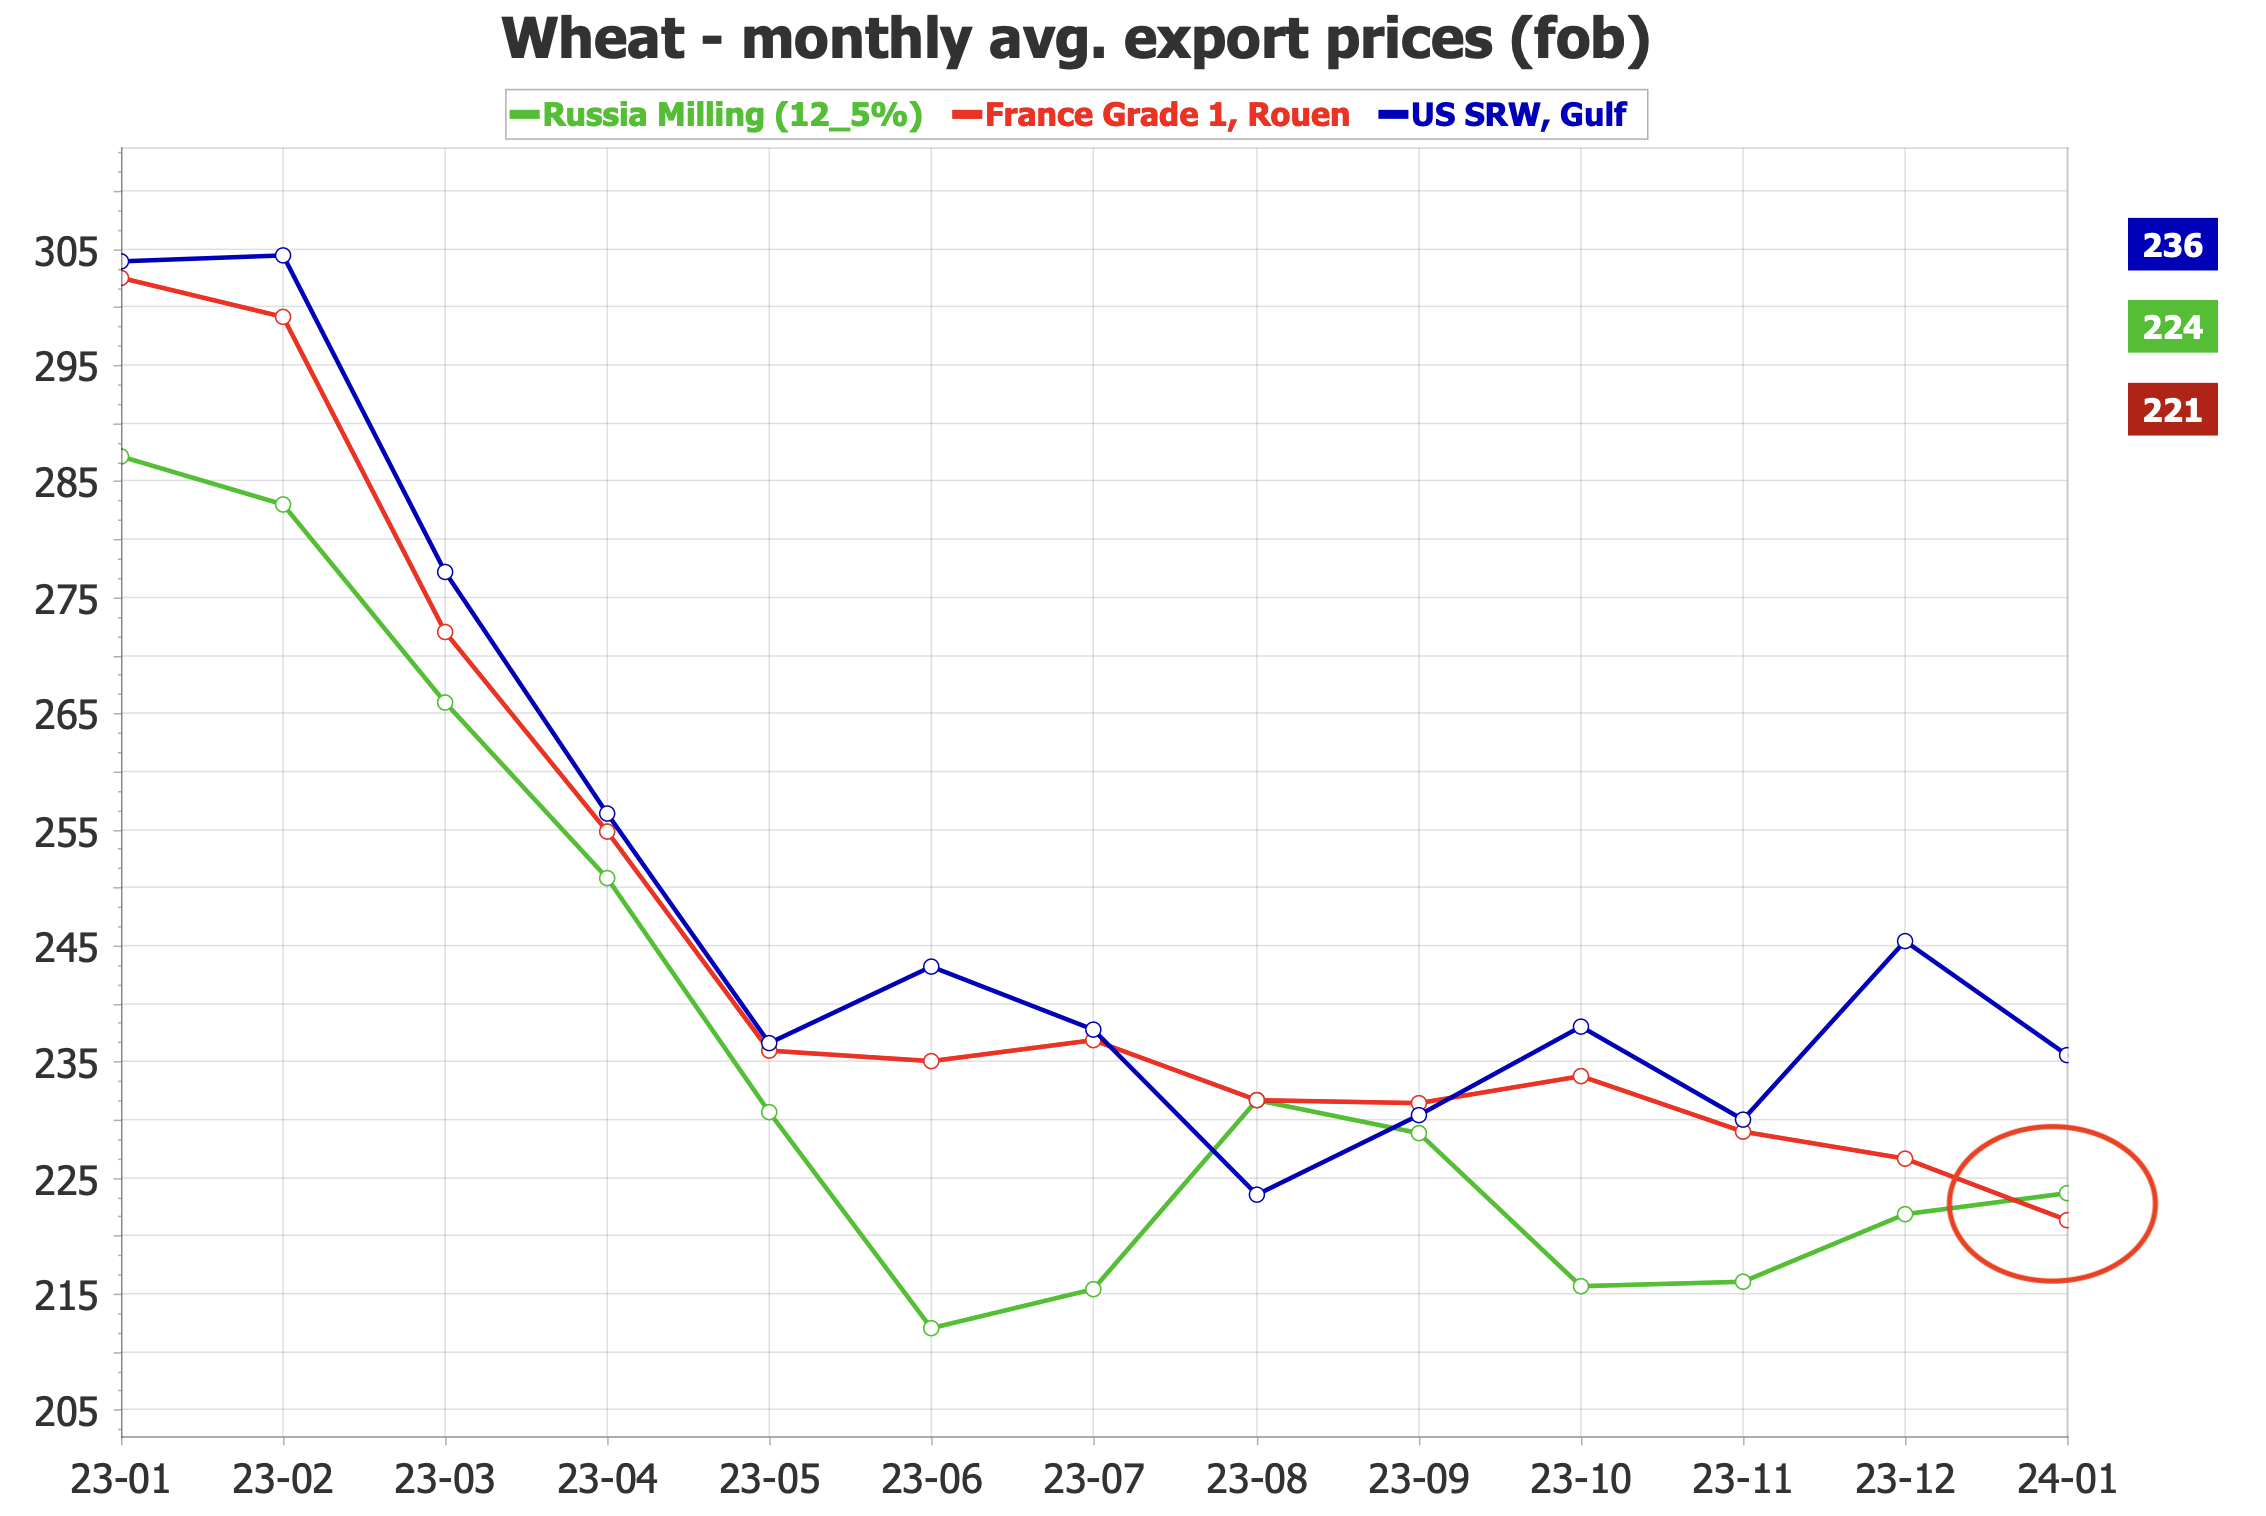 EU 🇪🇺 wheat prices are now fully competitive.